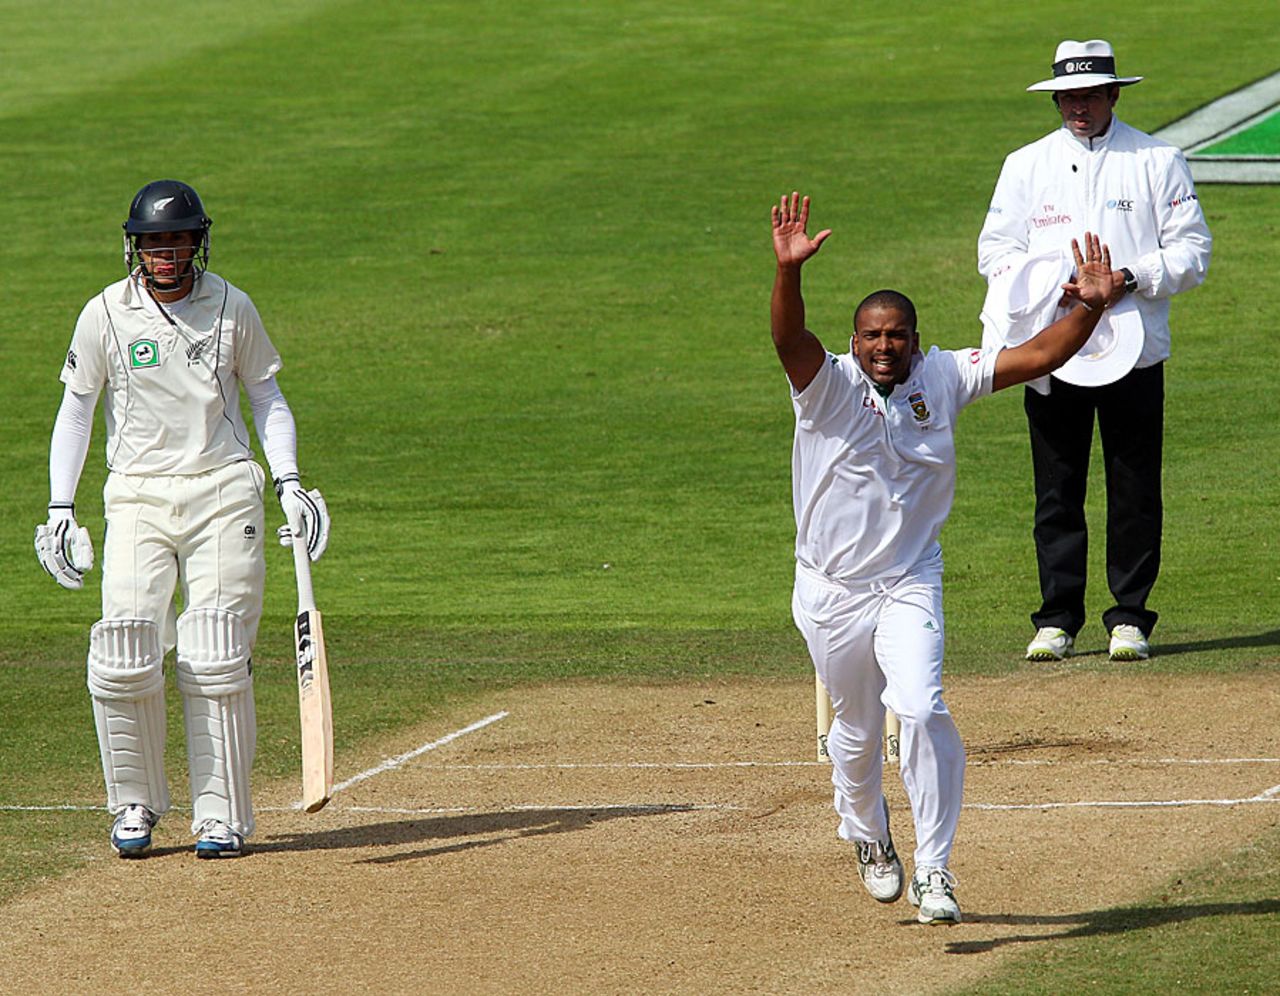 Vernon Philander celebrates a wicket, New Zealand v South Africa, 3rd Test, Wellington, 4th day, March 26, 2012